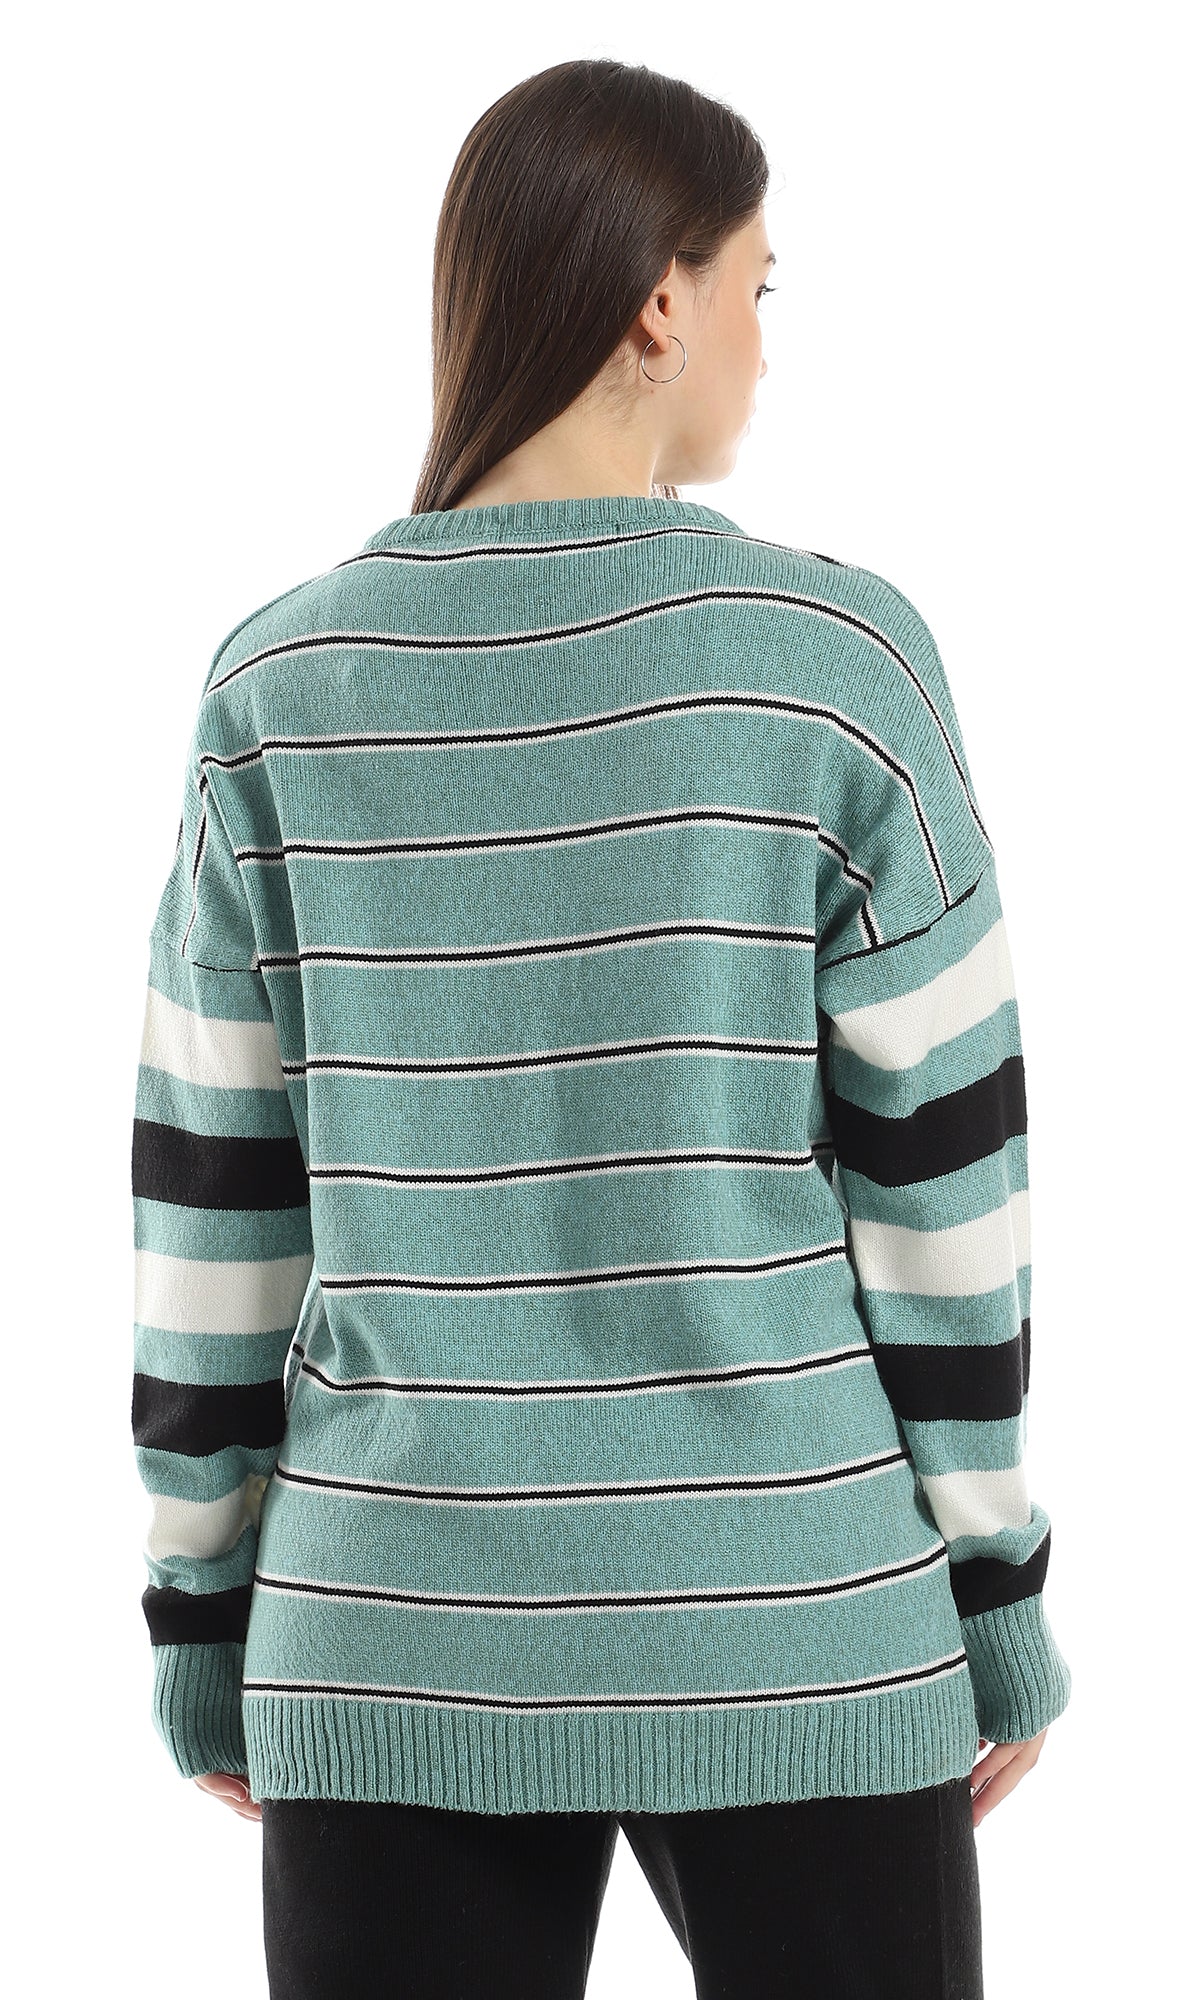 O160300 Wide Thin Striped Pattern Long Acrylic Pullover - Green, Black & Off White